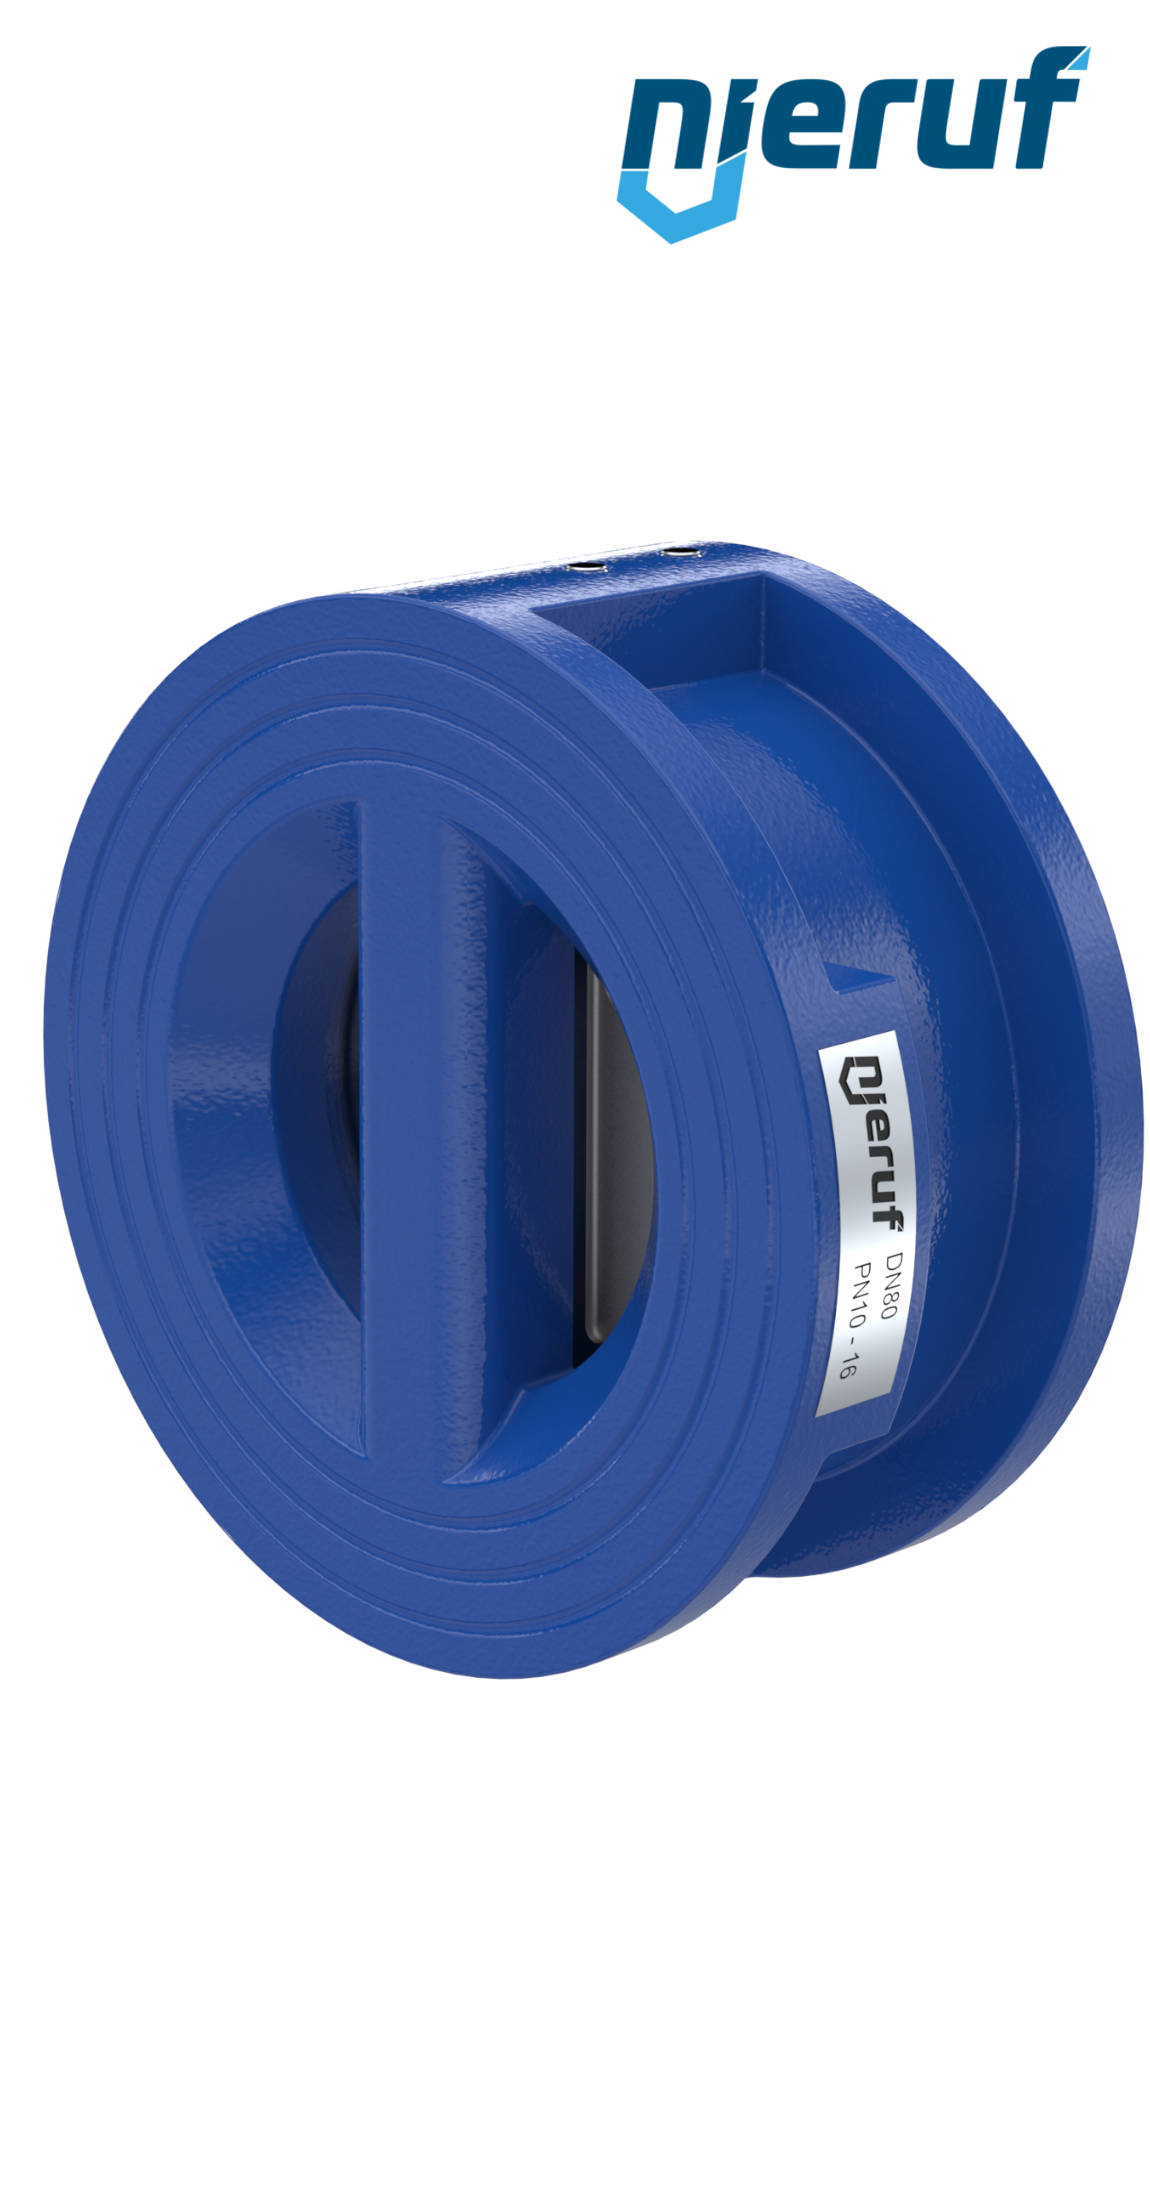 dual plate check valve DN80 DR01 GGG40 epoxyd plated blue 180µm EPDM